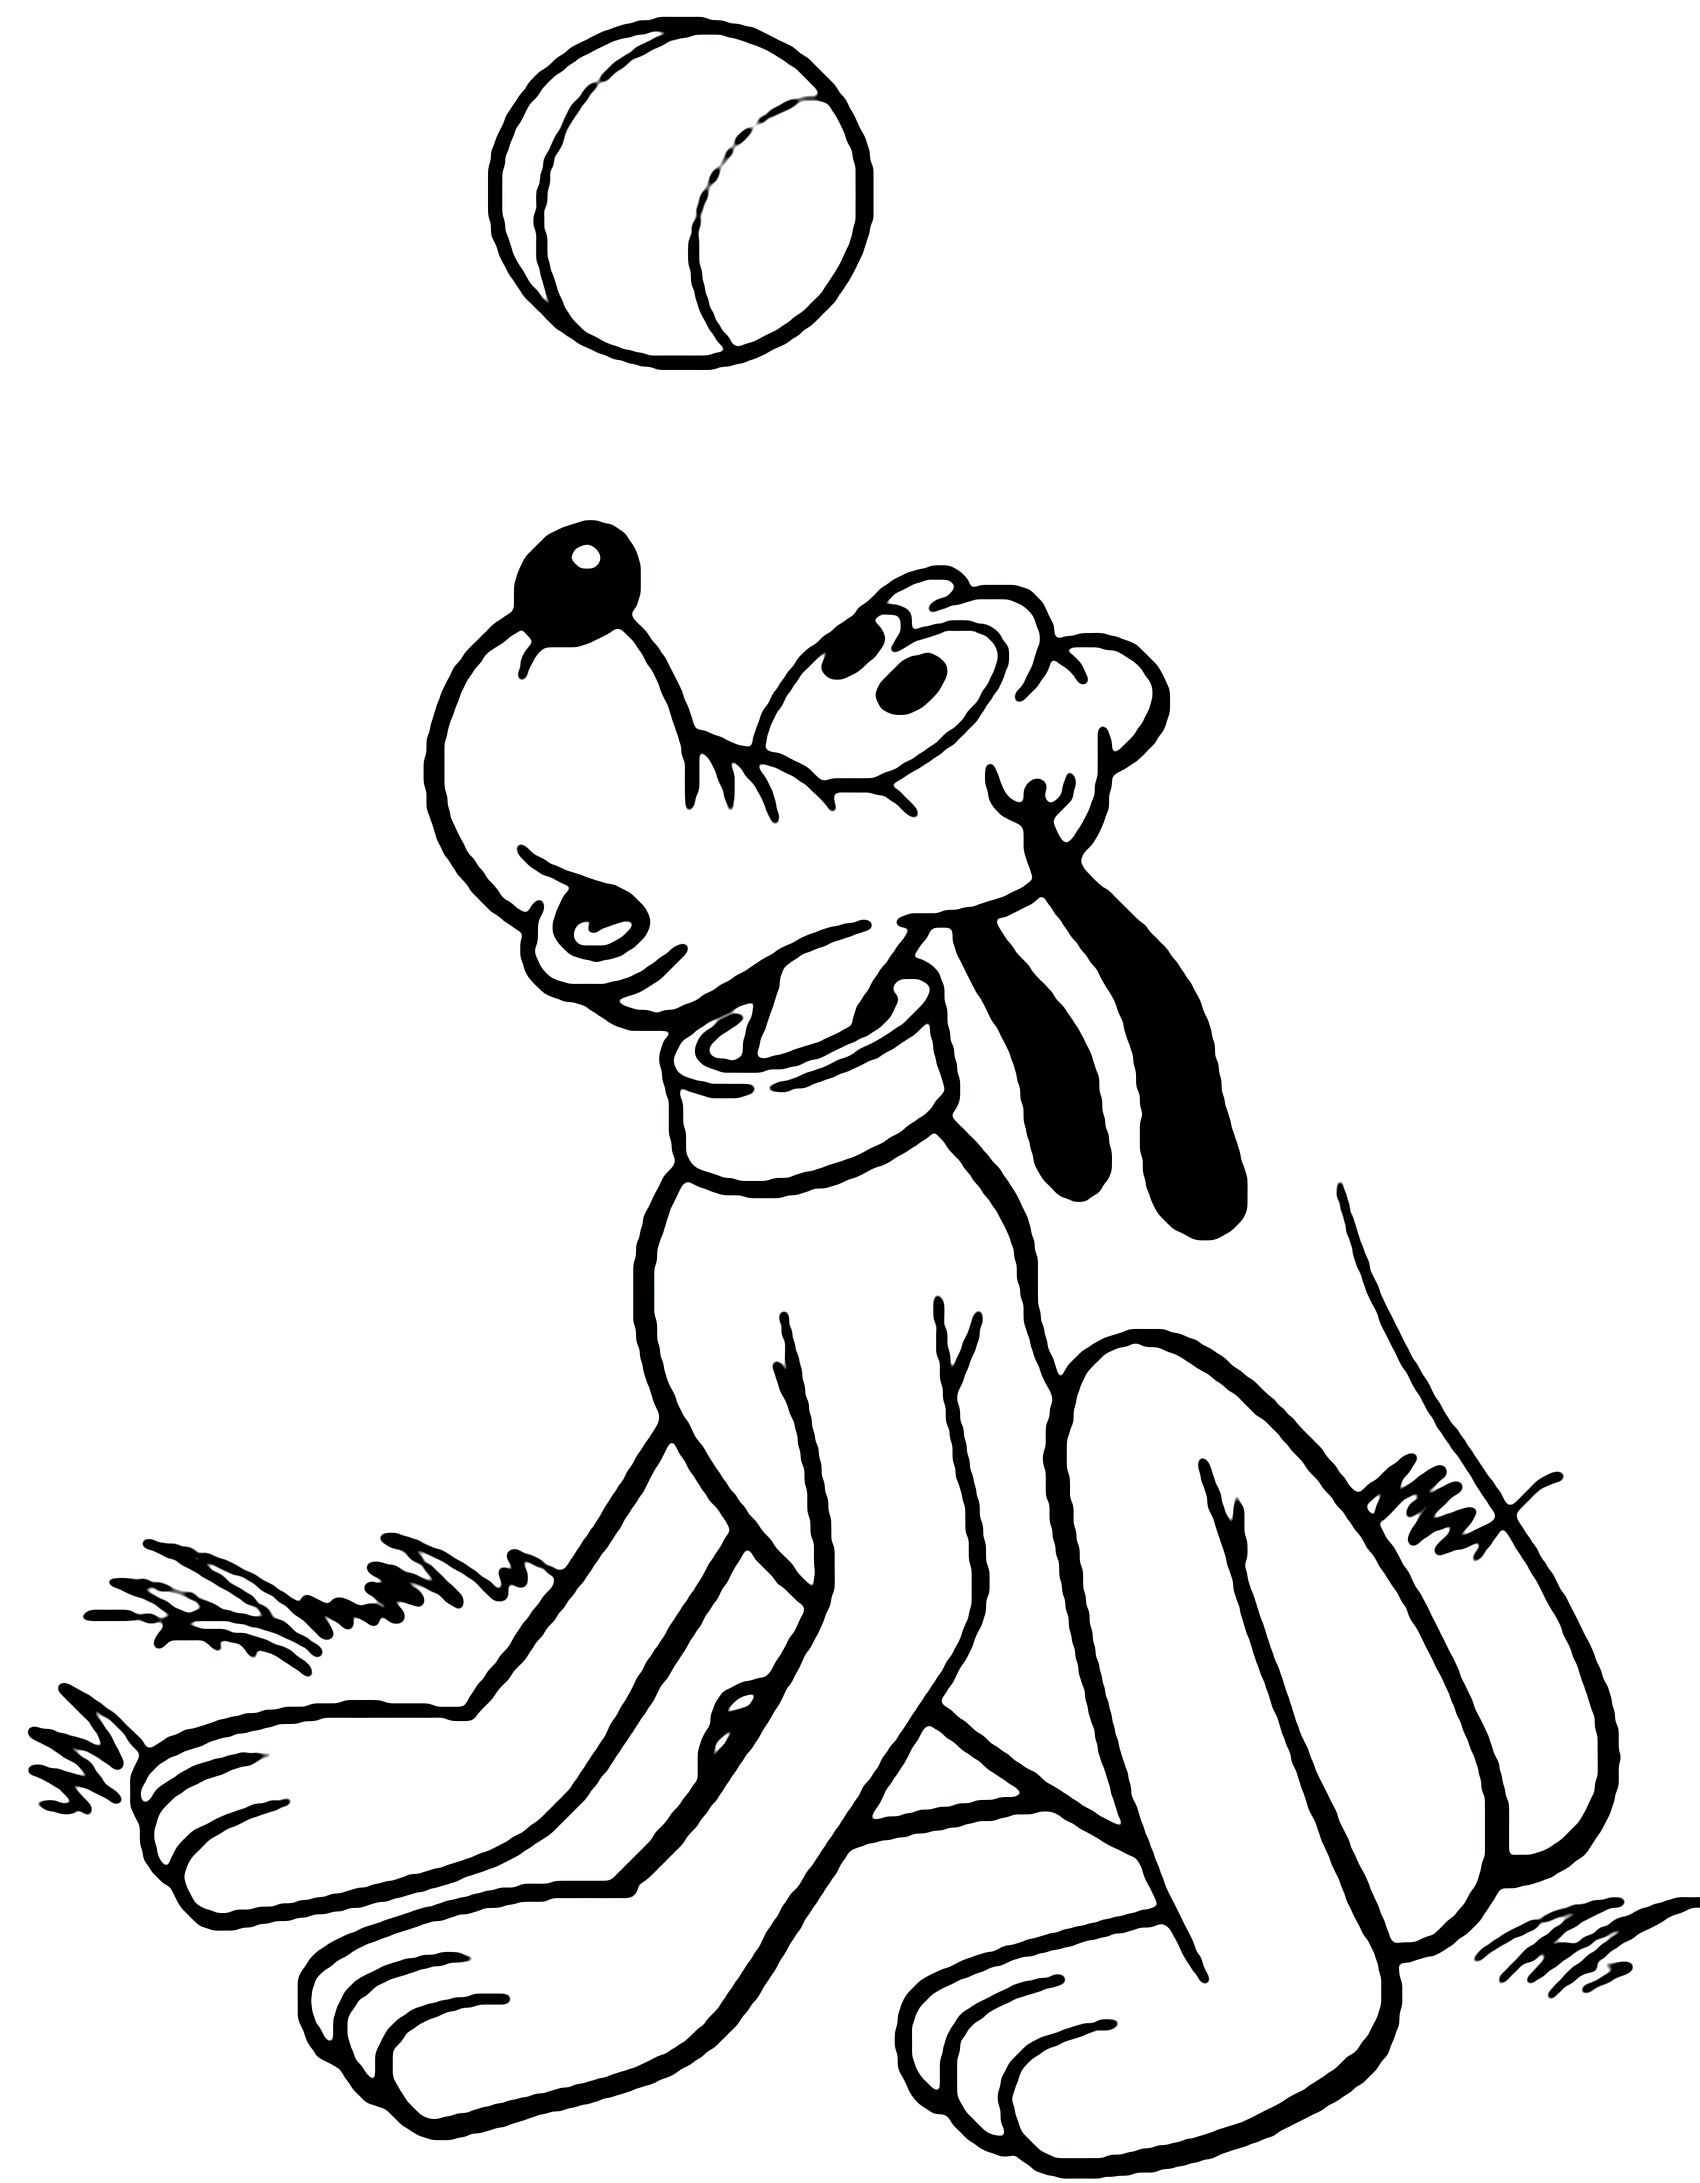 Printable Pluto Coloring Page for Kids